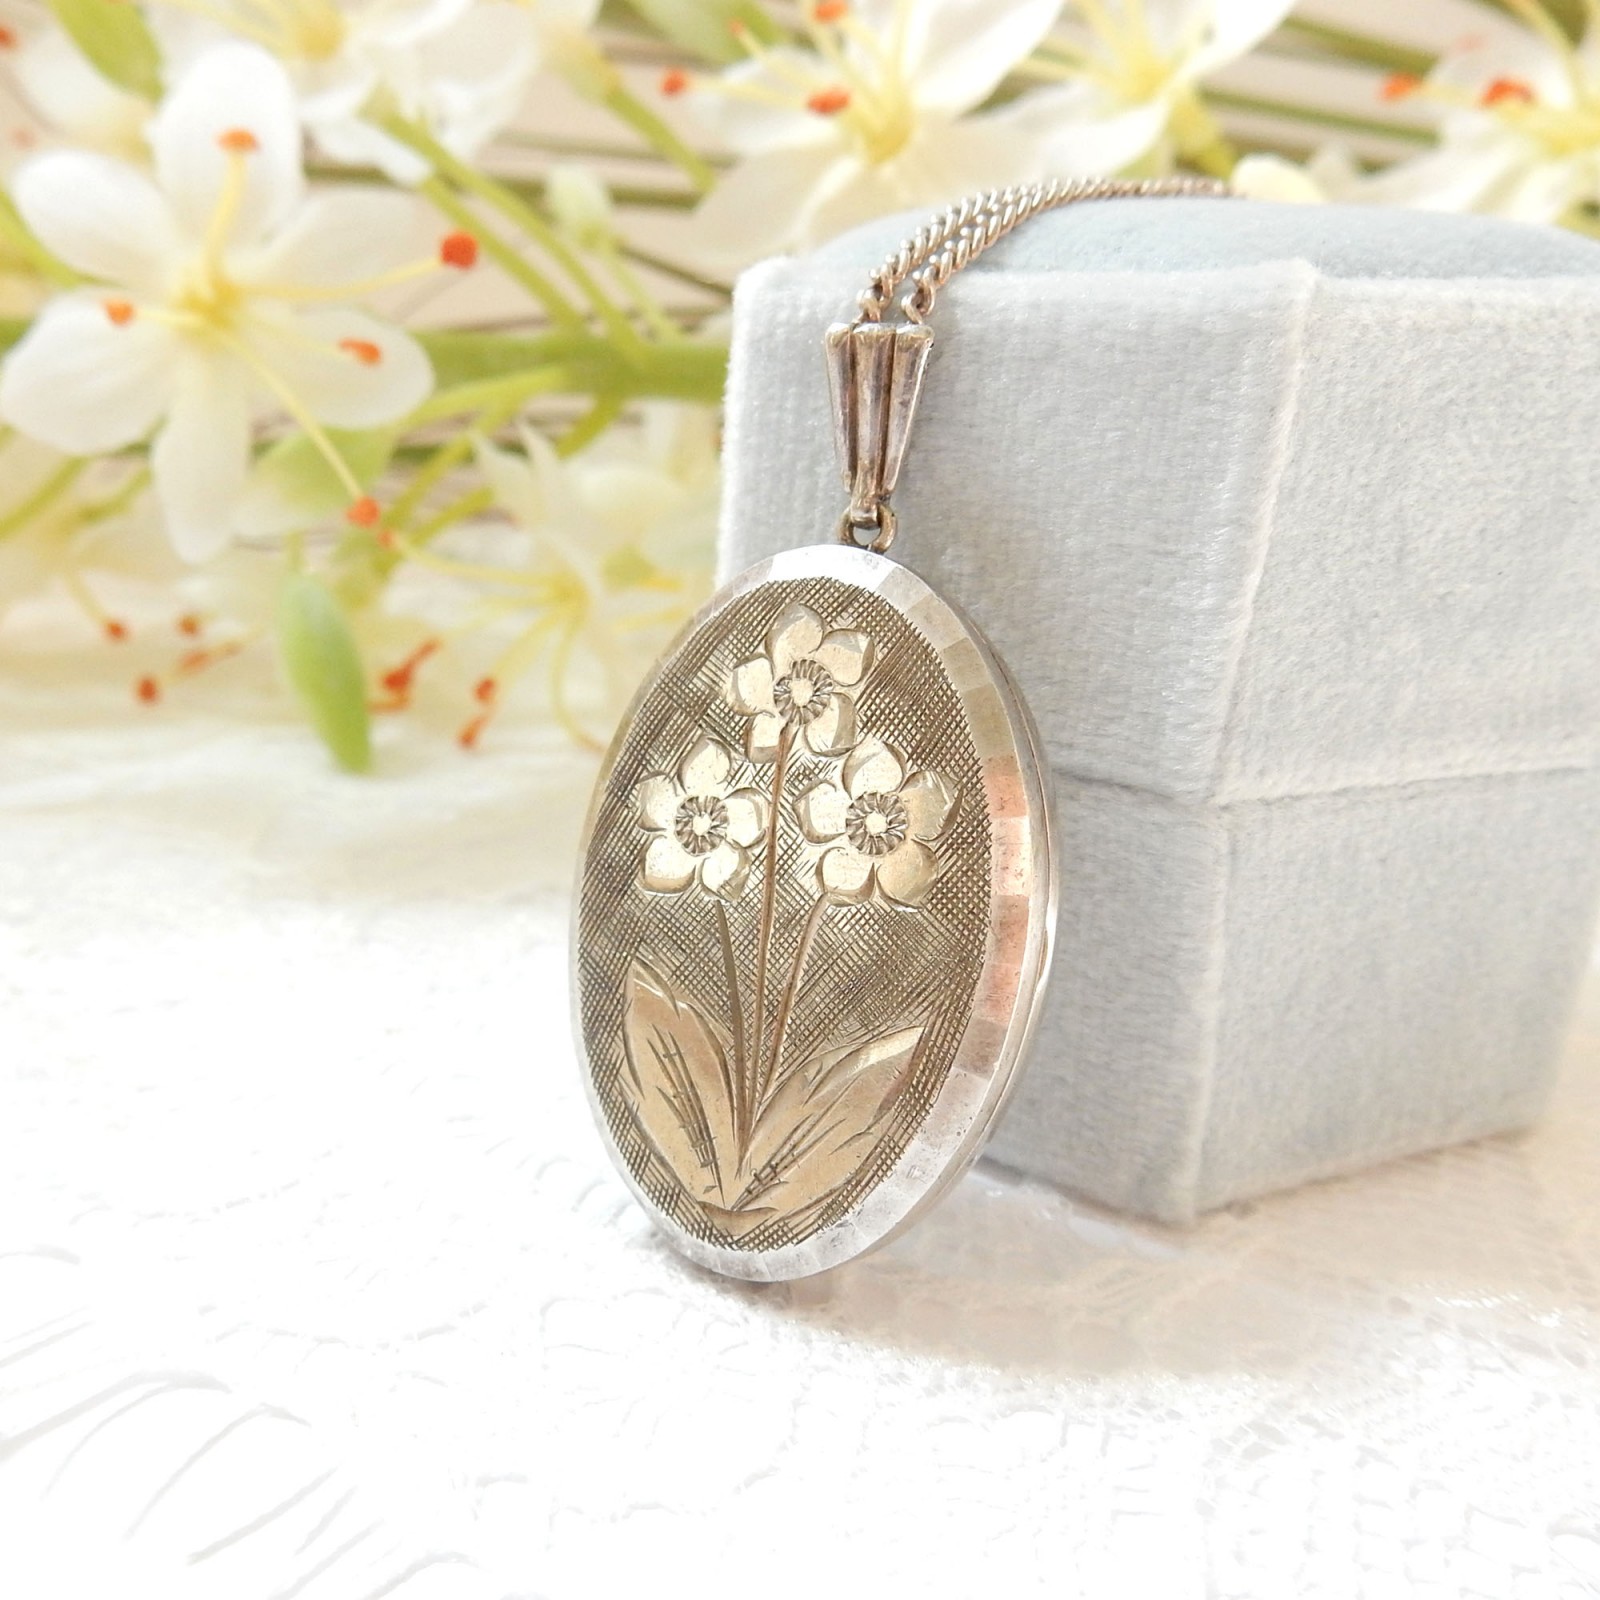 VINTAGE LOCKET NECKLACE, Tiny Antiqued Brass Picture Locket Round Dangling Locket  Pendant Victorian Open Locket Romantic Jewelry Gift N6500 - Etsy